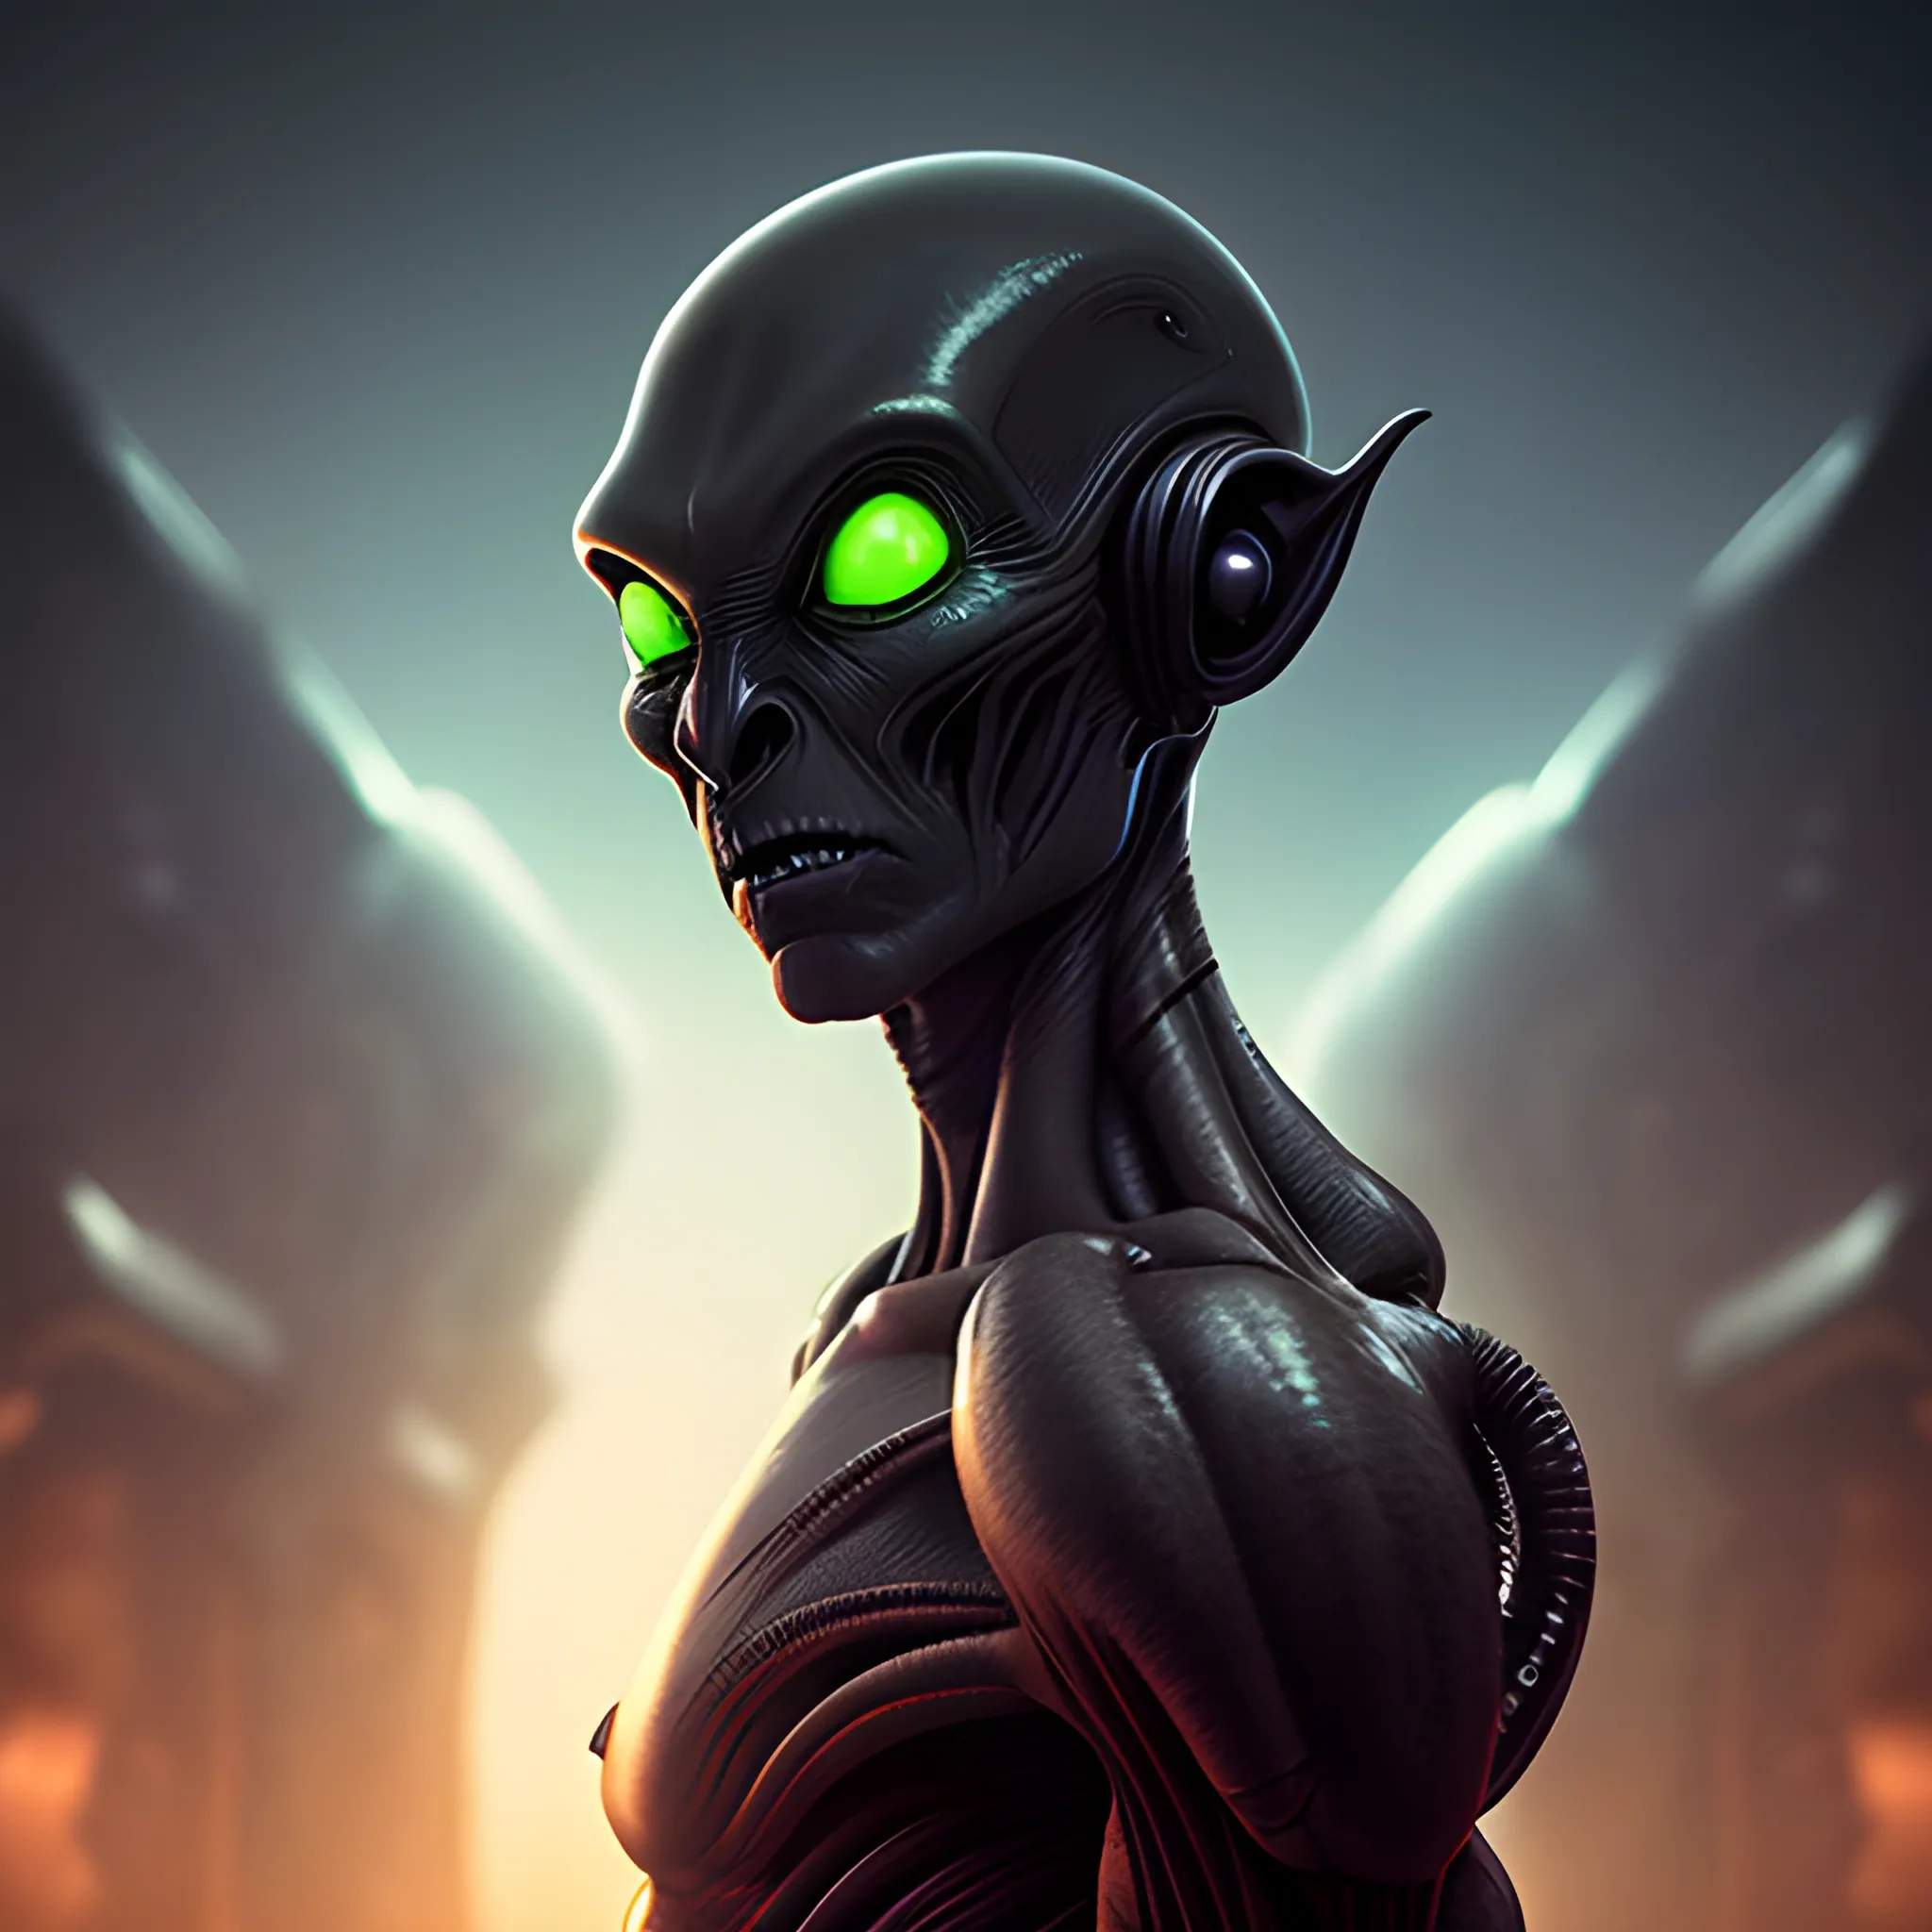 A high resolution, cinematic photo of a dark humanoid alien, this alien engineer is a masterpiece